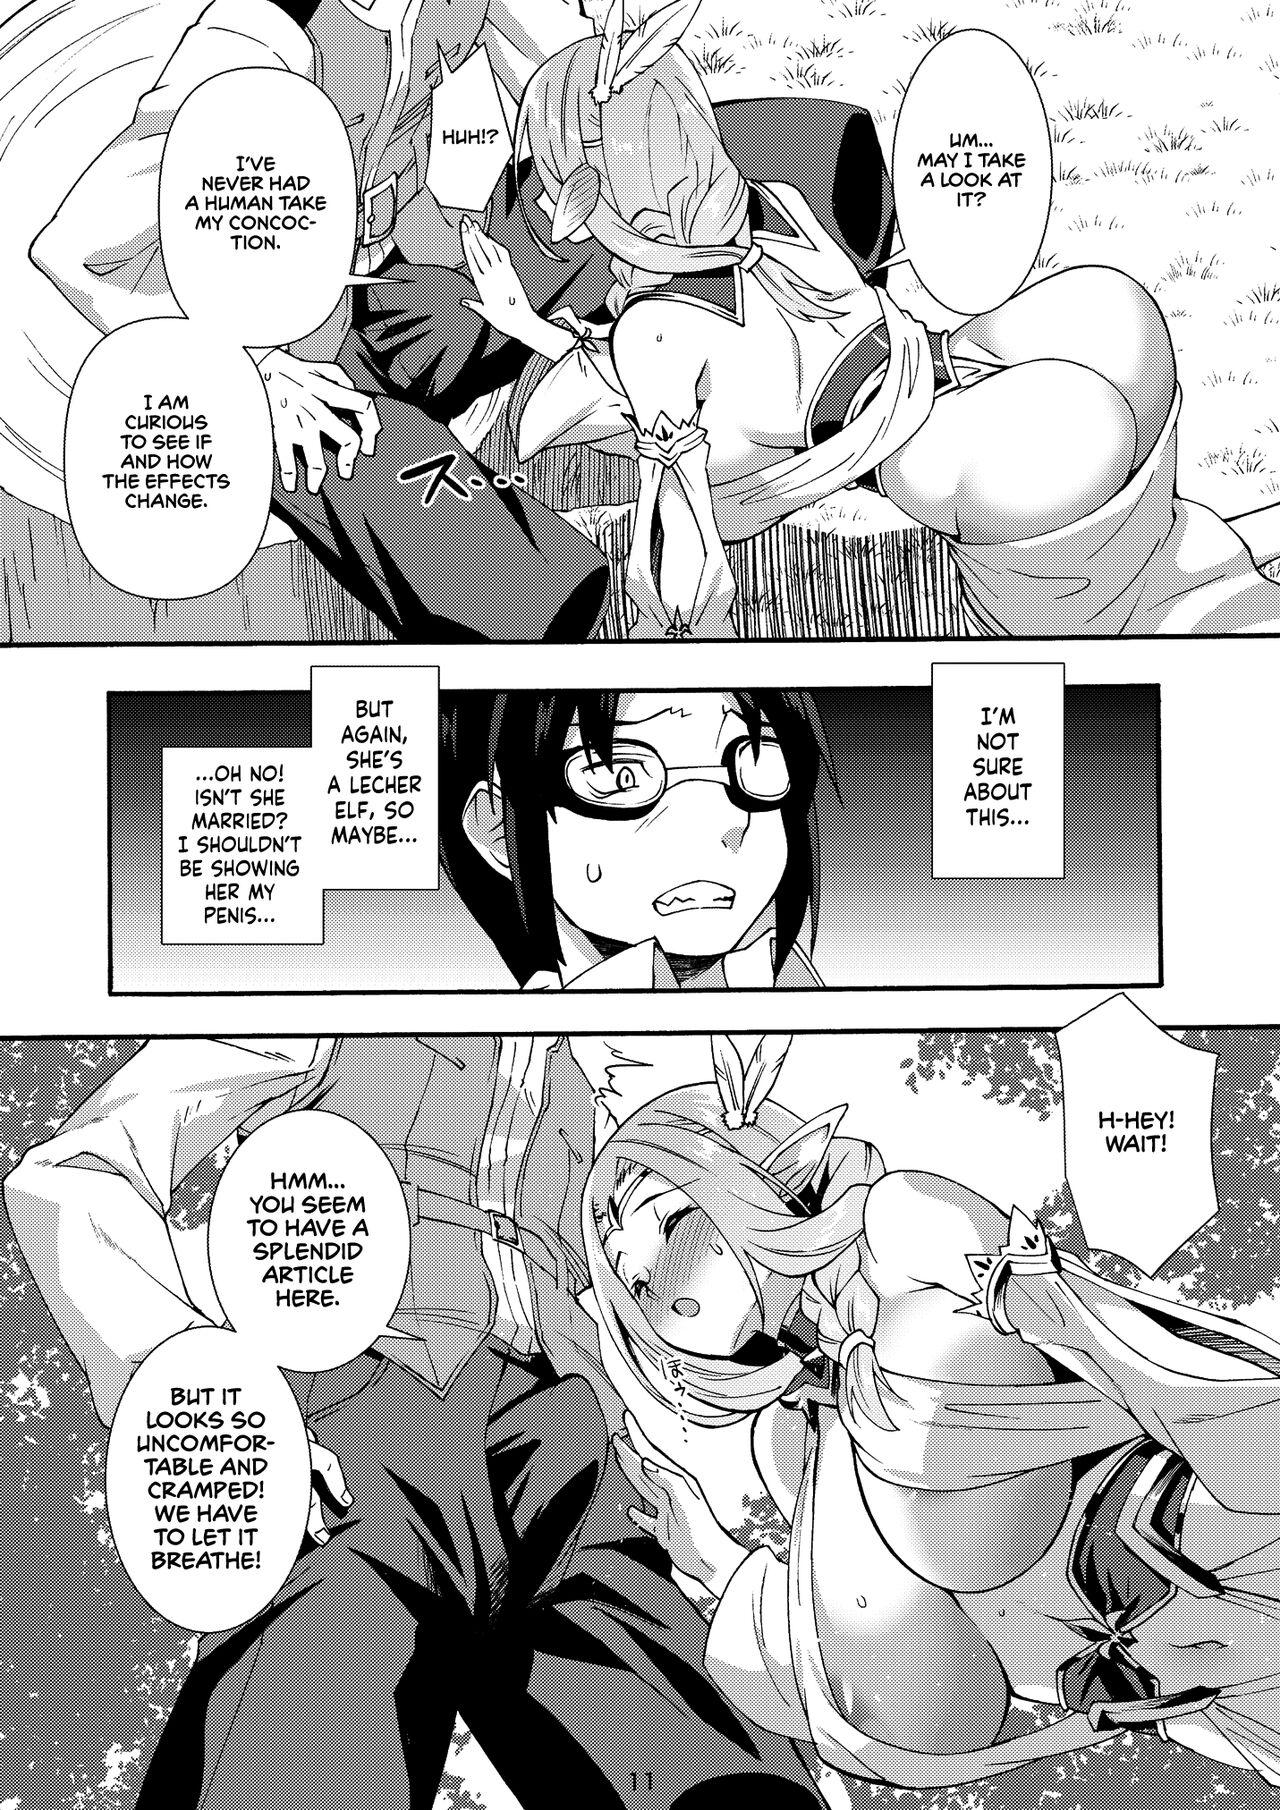 Lolicon Sukebe Elf Tanbouki 3 | Records of the Search for the Lustful Elves 3 - Original Suruba - Page 11